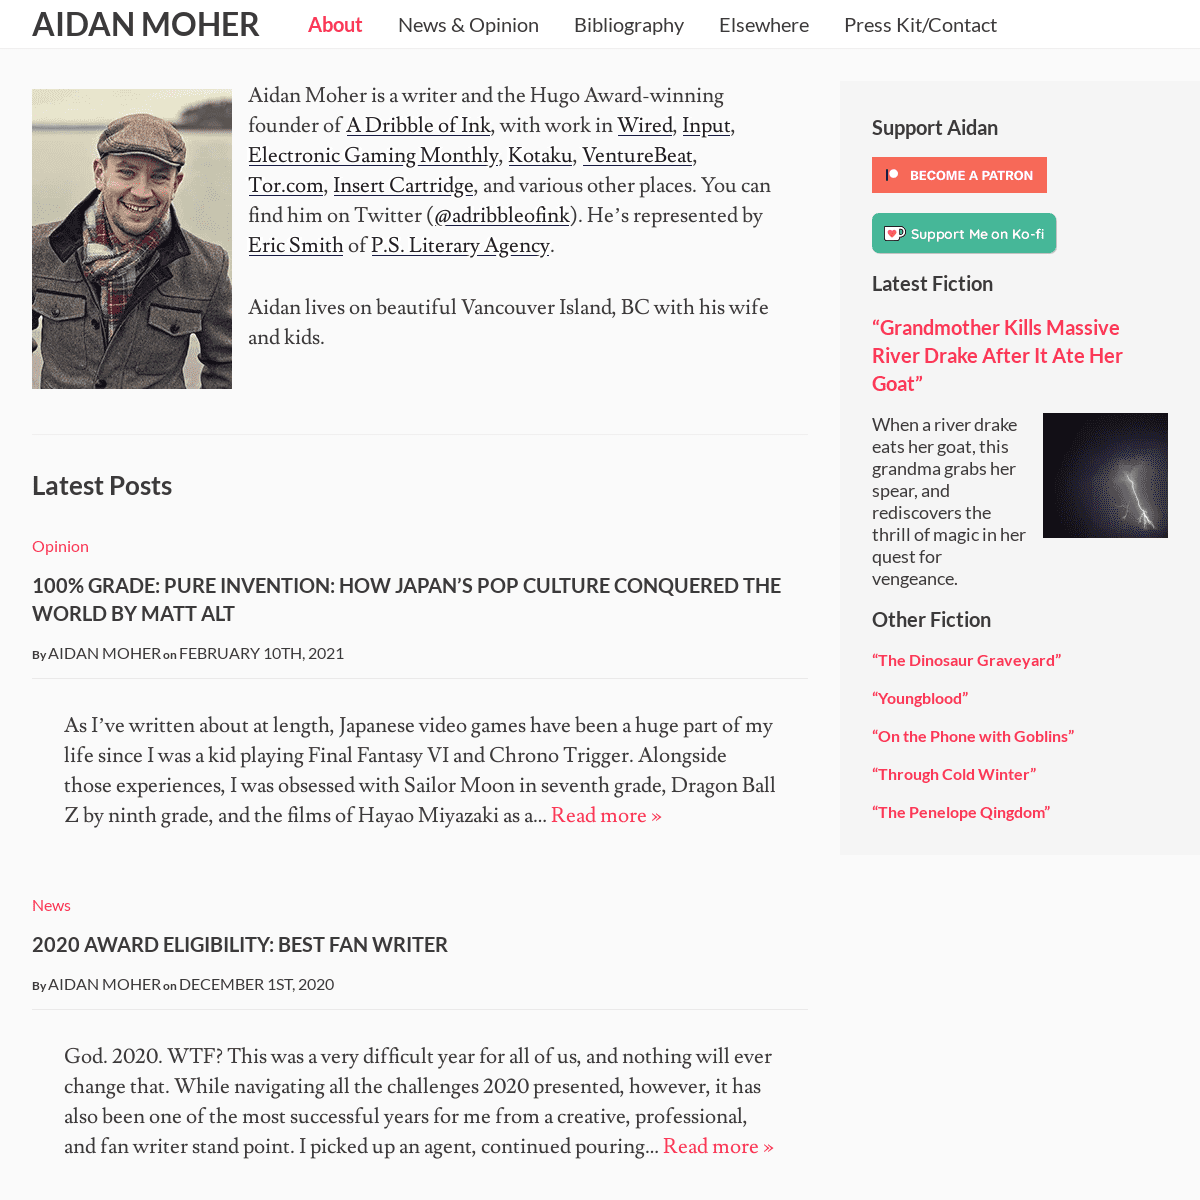 A complete backup of https://aidanmoher.com